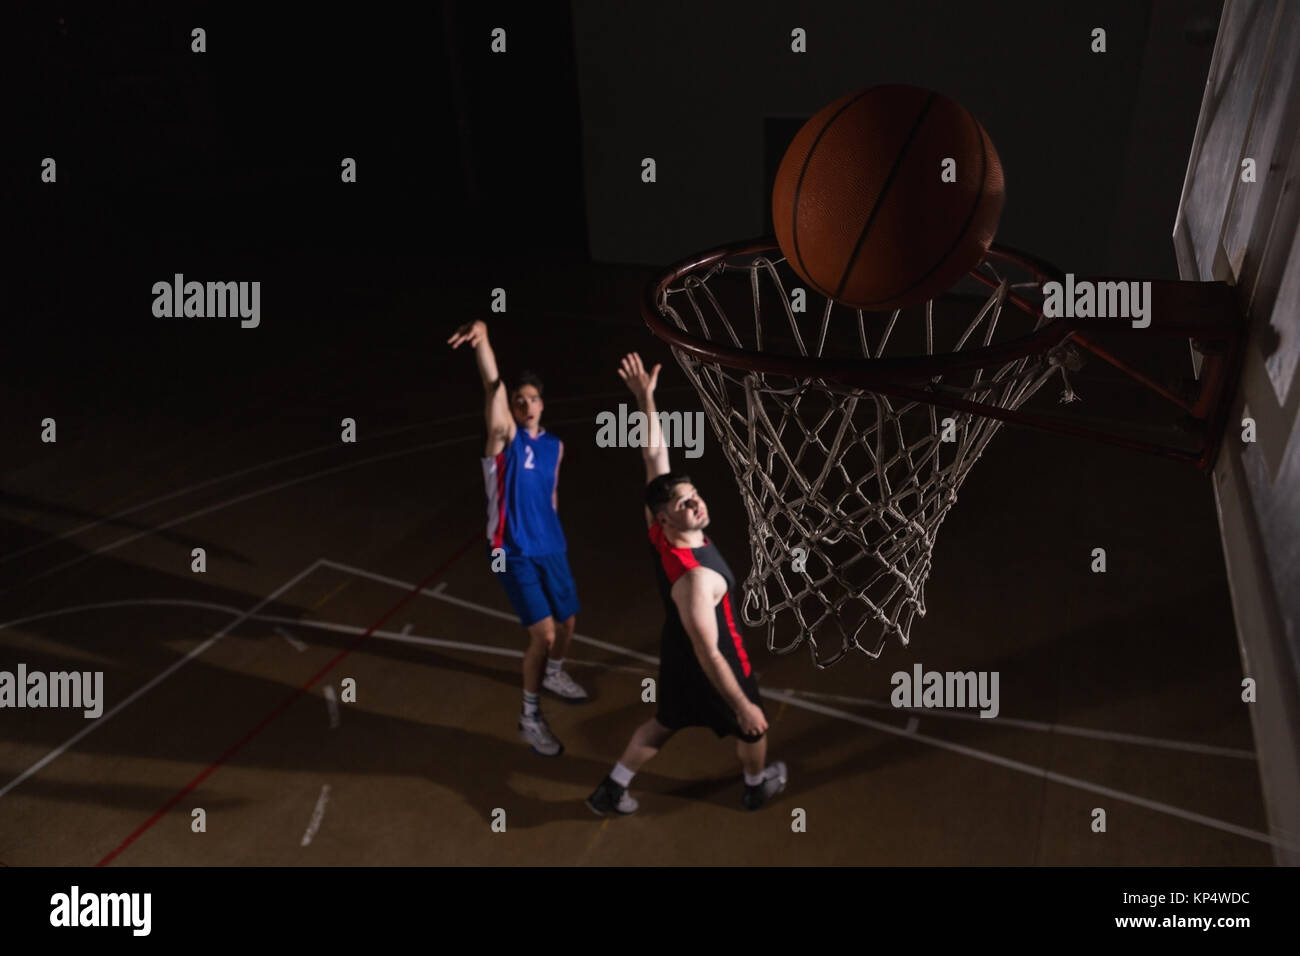 Two players playing basketball in the court Stock Photo